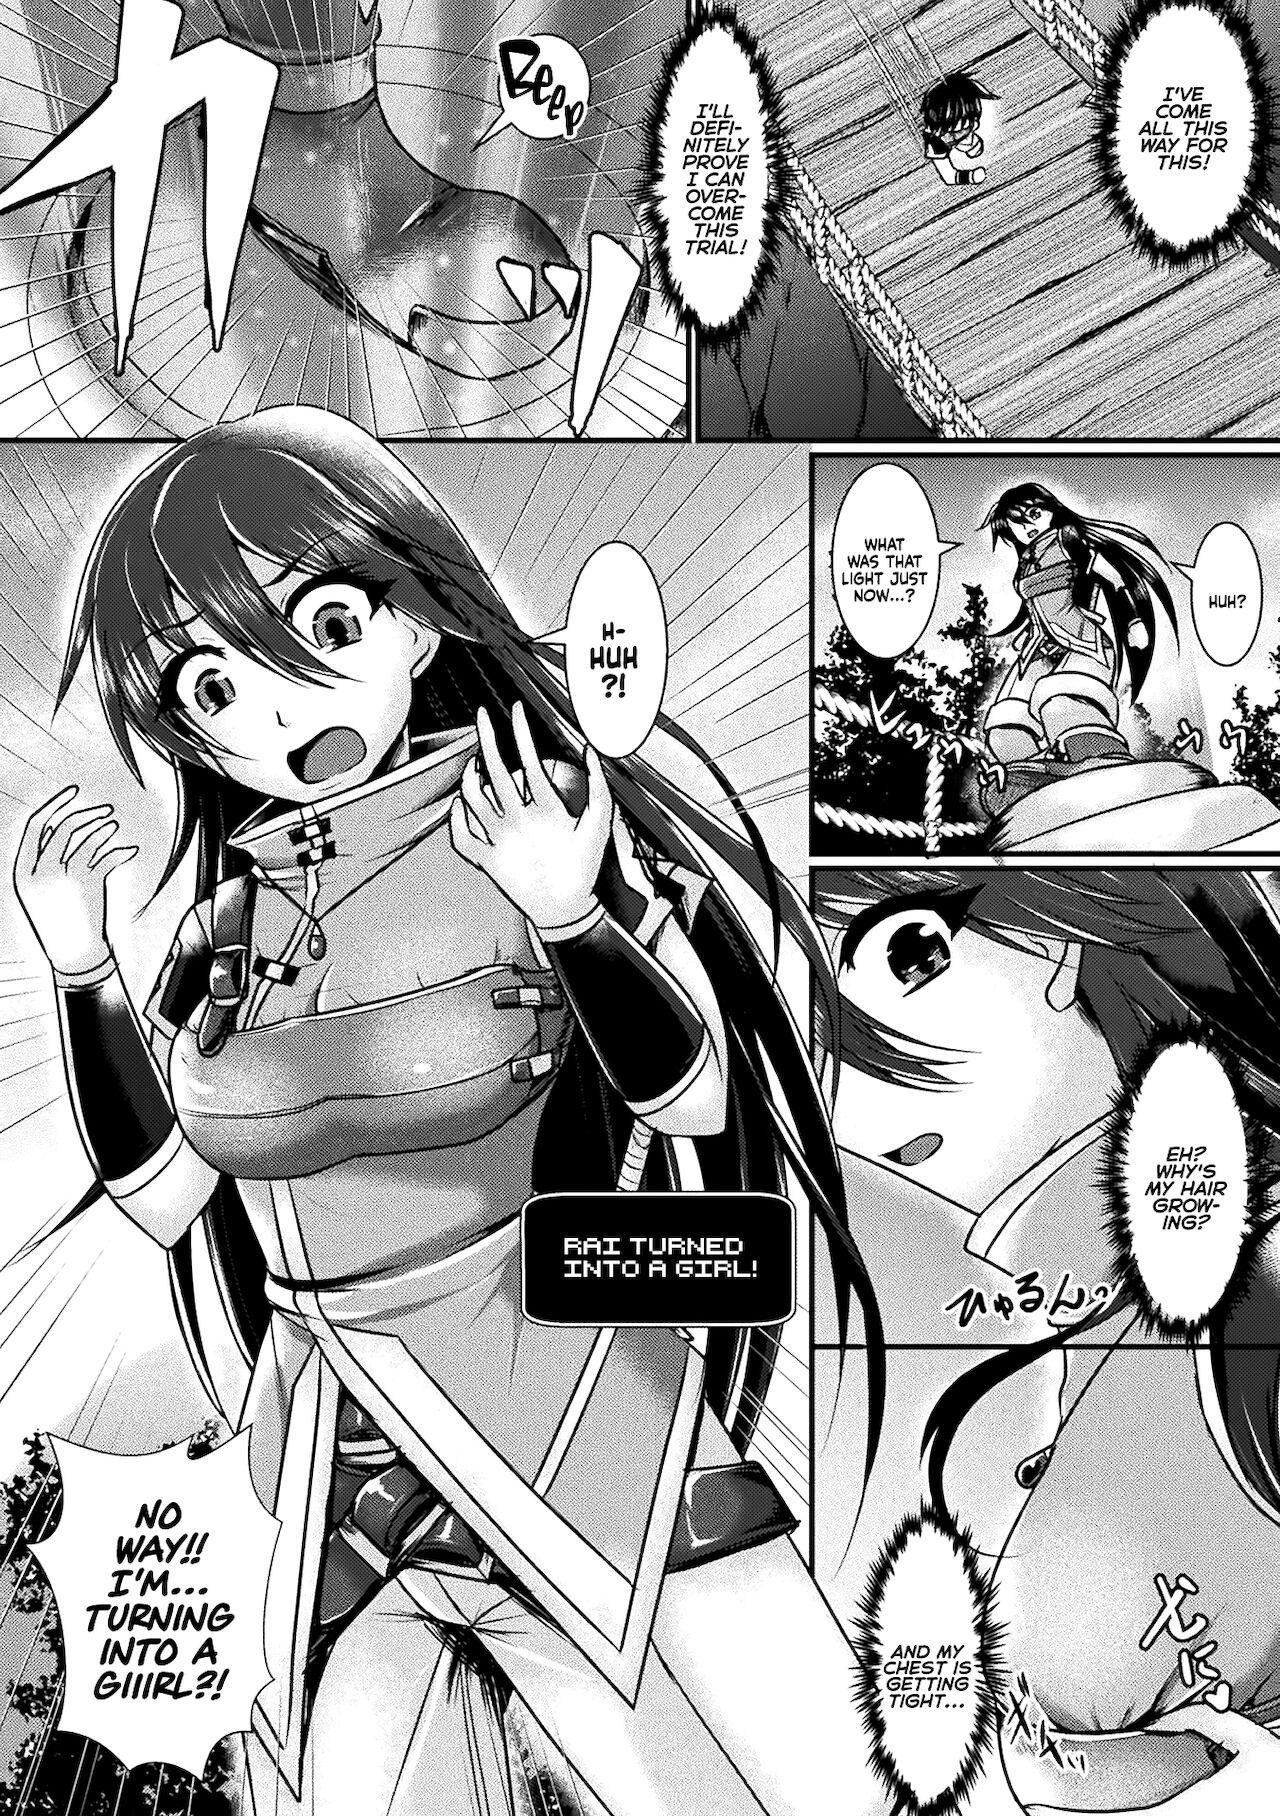 Oldman The Final Trial - Ero trap dungeon Celebrity Porn - Page 2